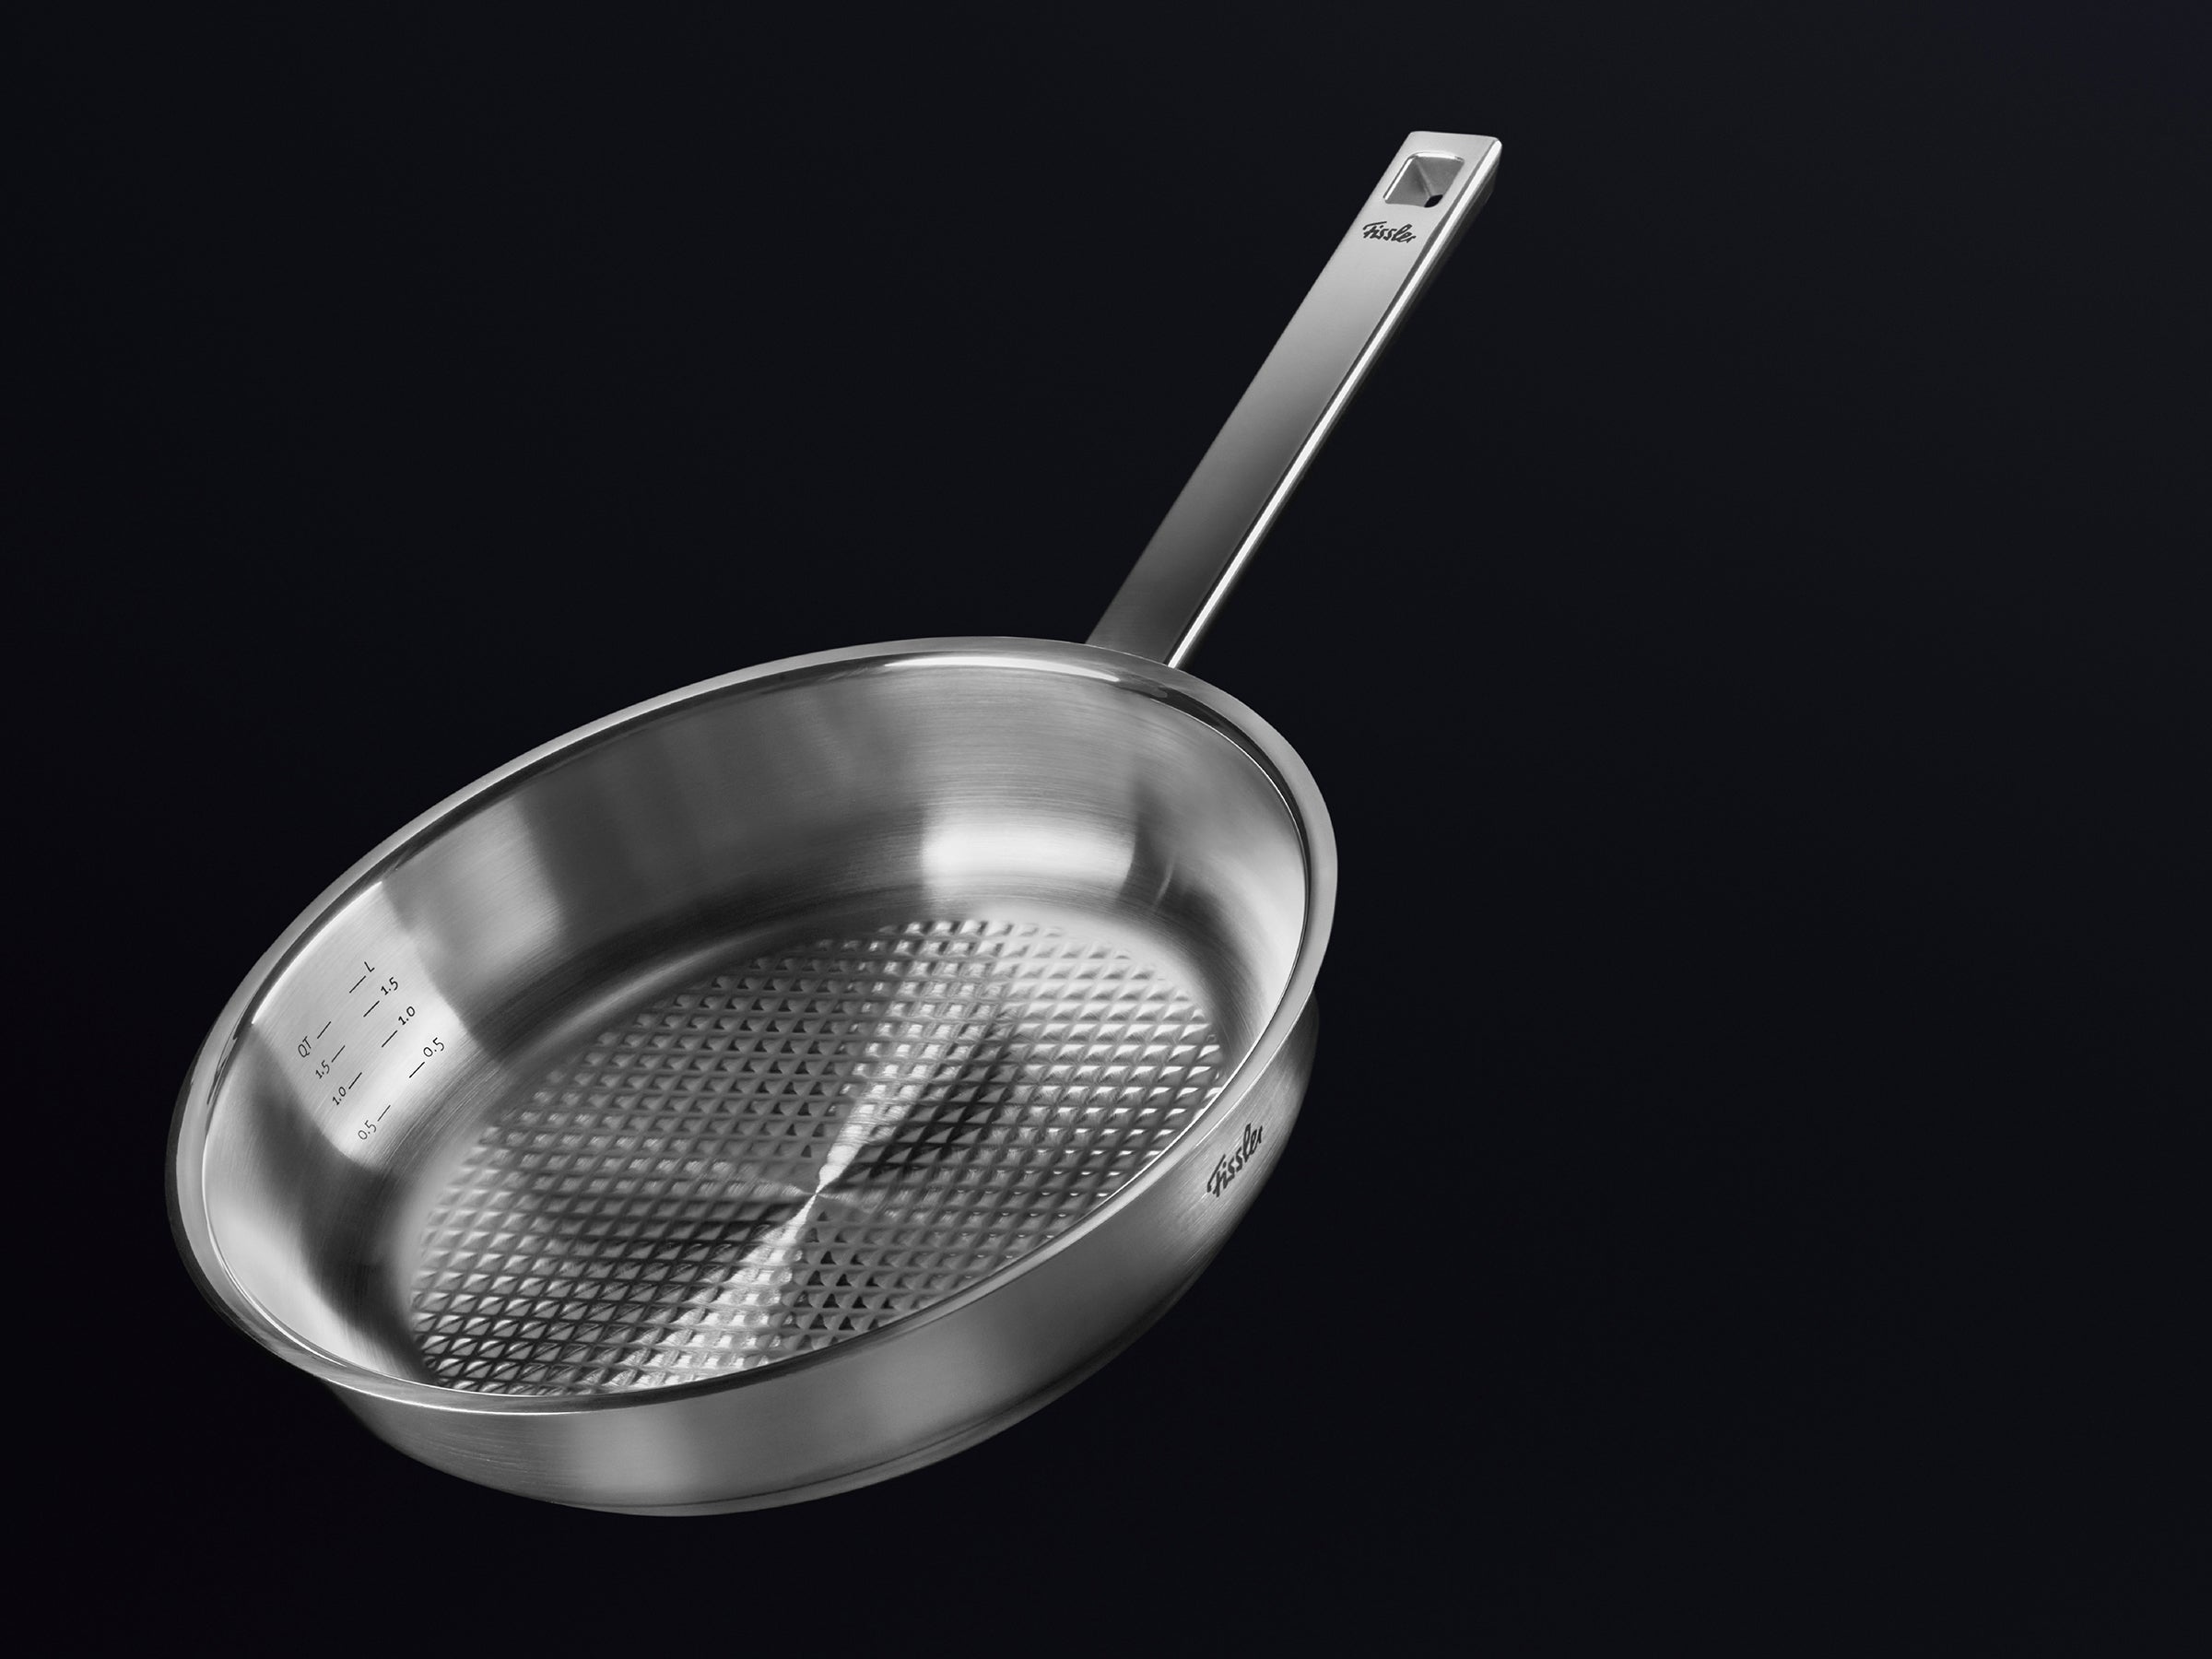 Fissler - Original-Profi Collection® Stainless Steel Frying Pan, 11 Inch